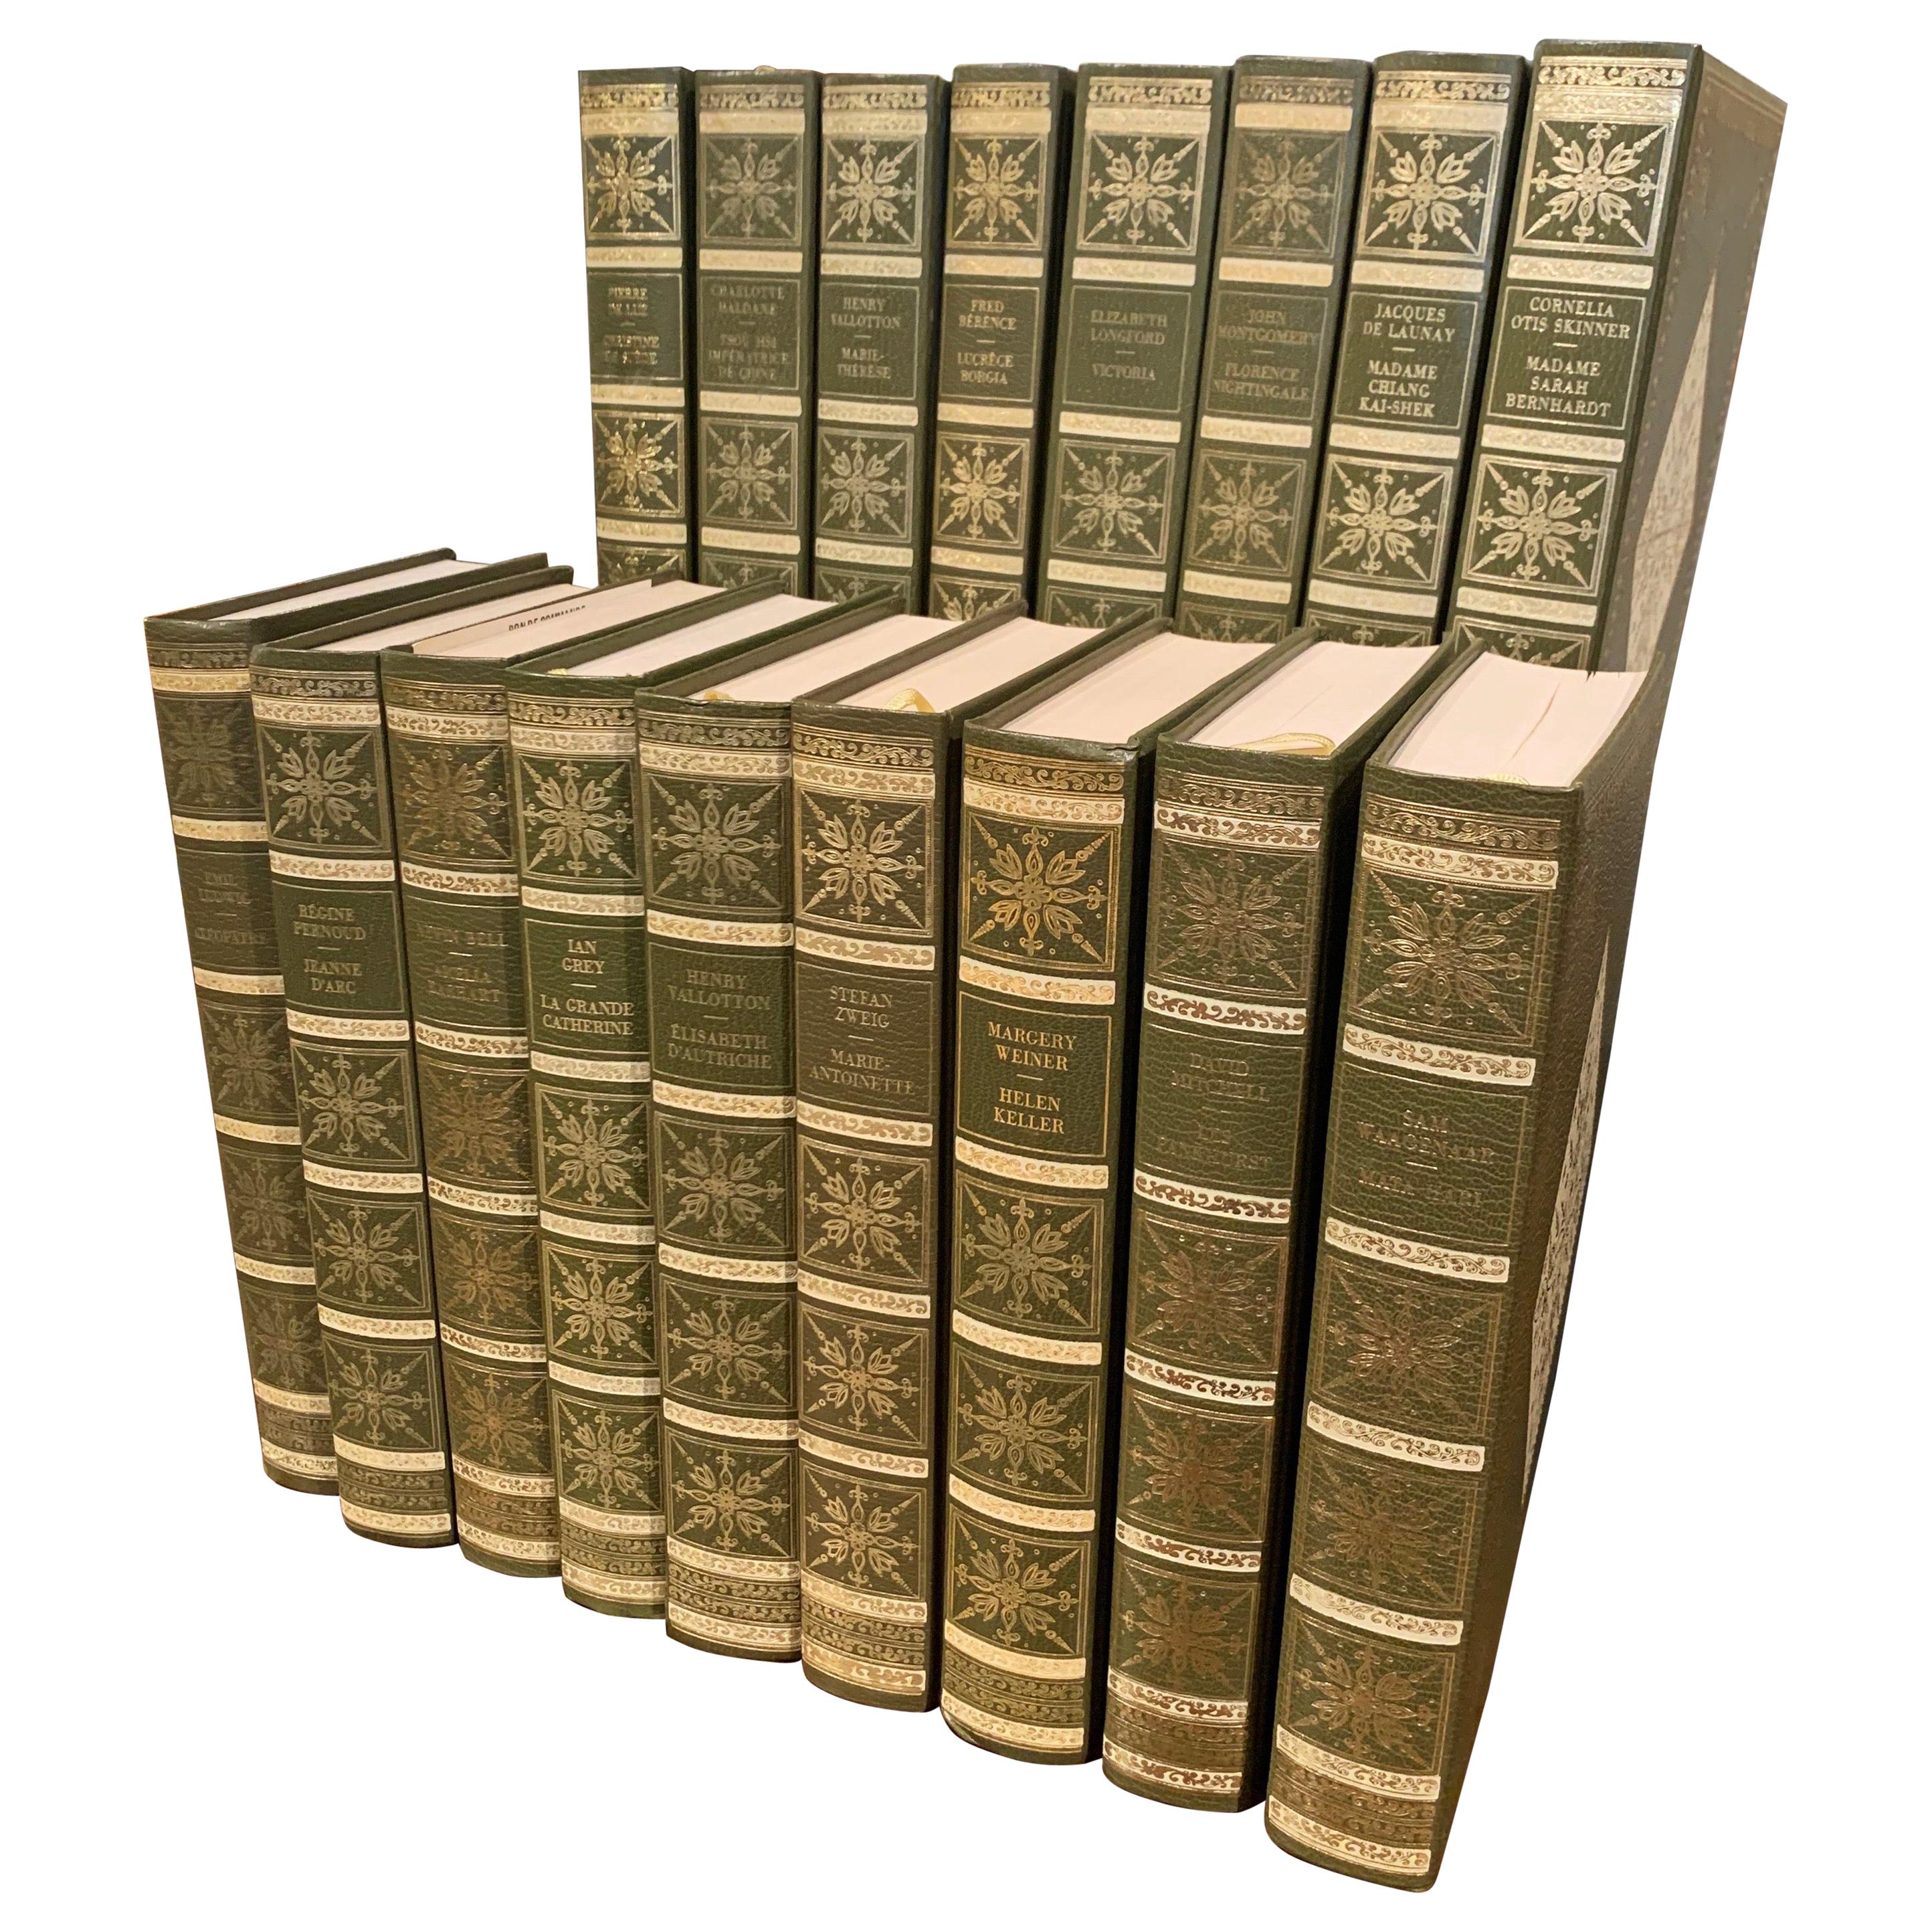 Set of 17 Green Leather and Gilt French Books "Les Femmes Celebres" Dated 1971